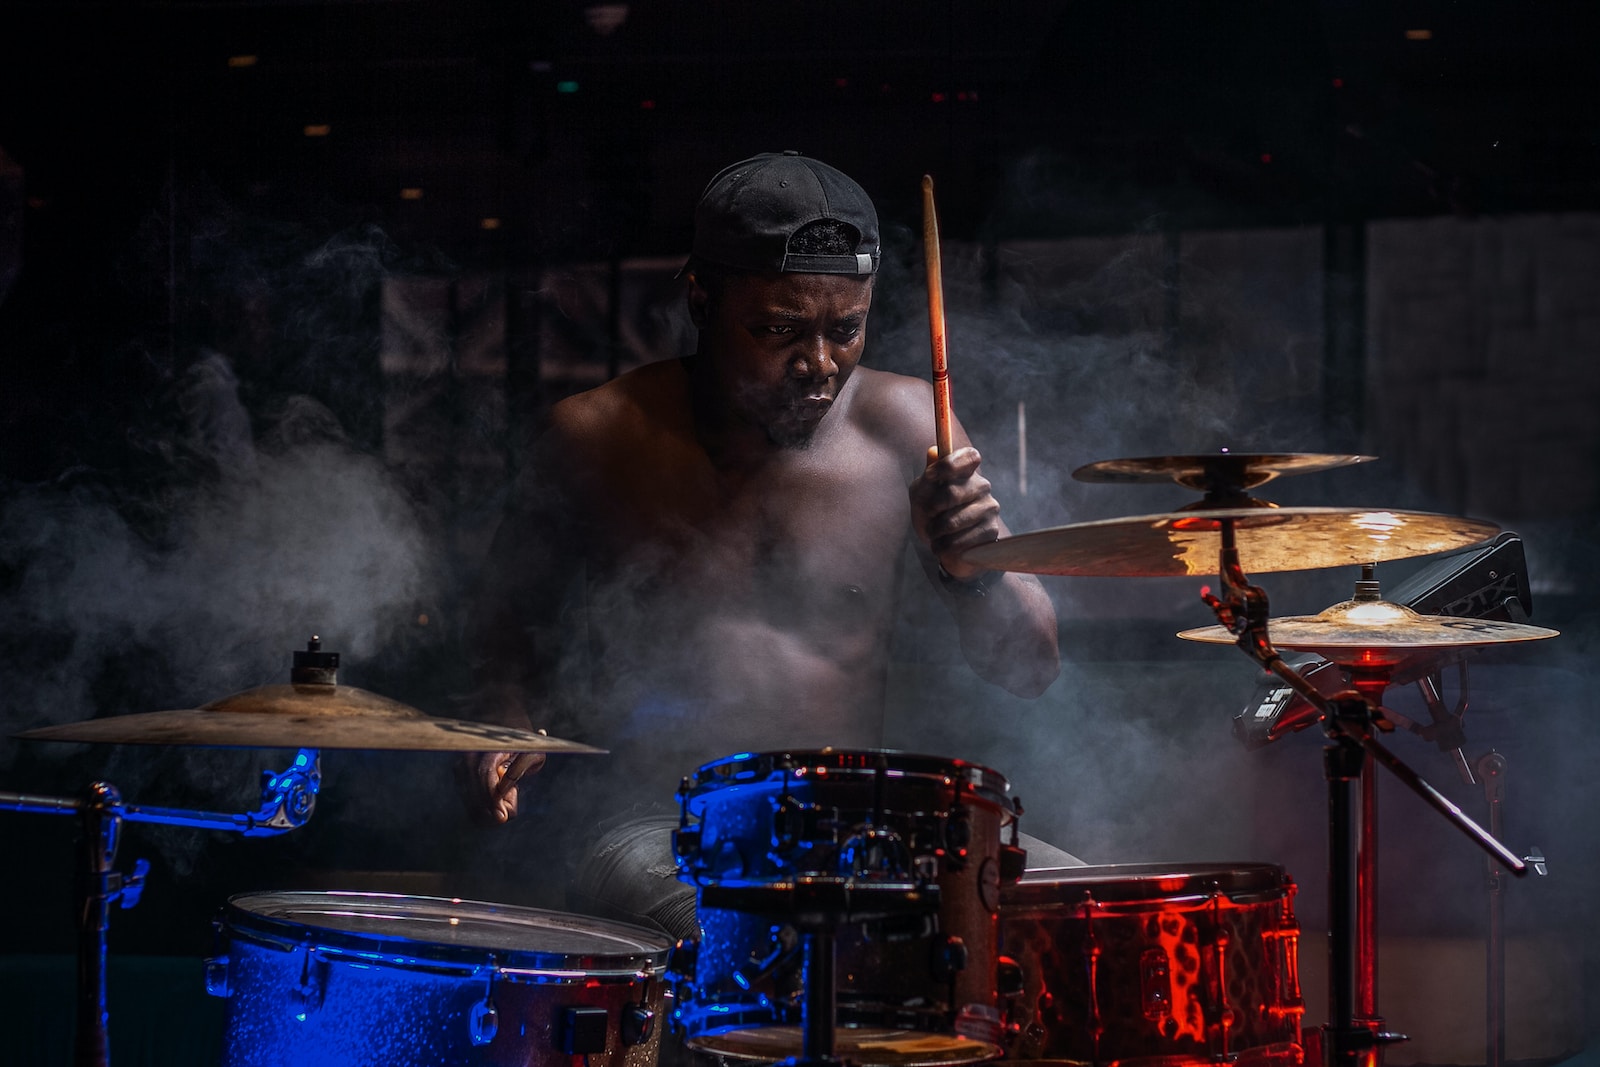 a shirtless man playing drums in a dark room